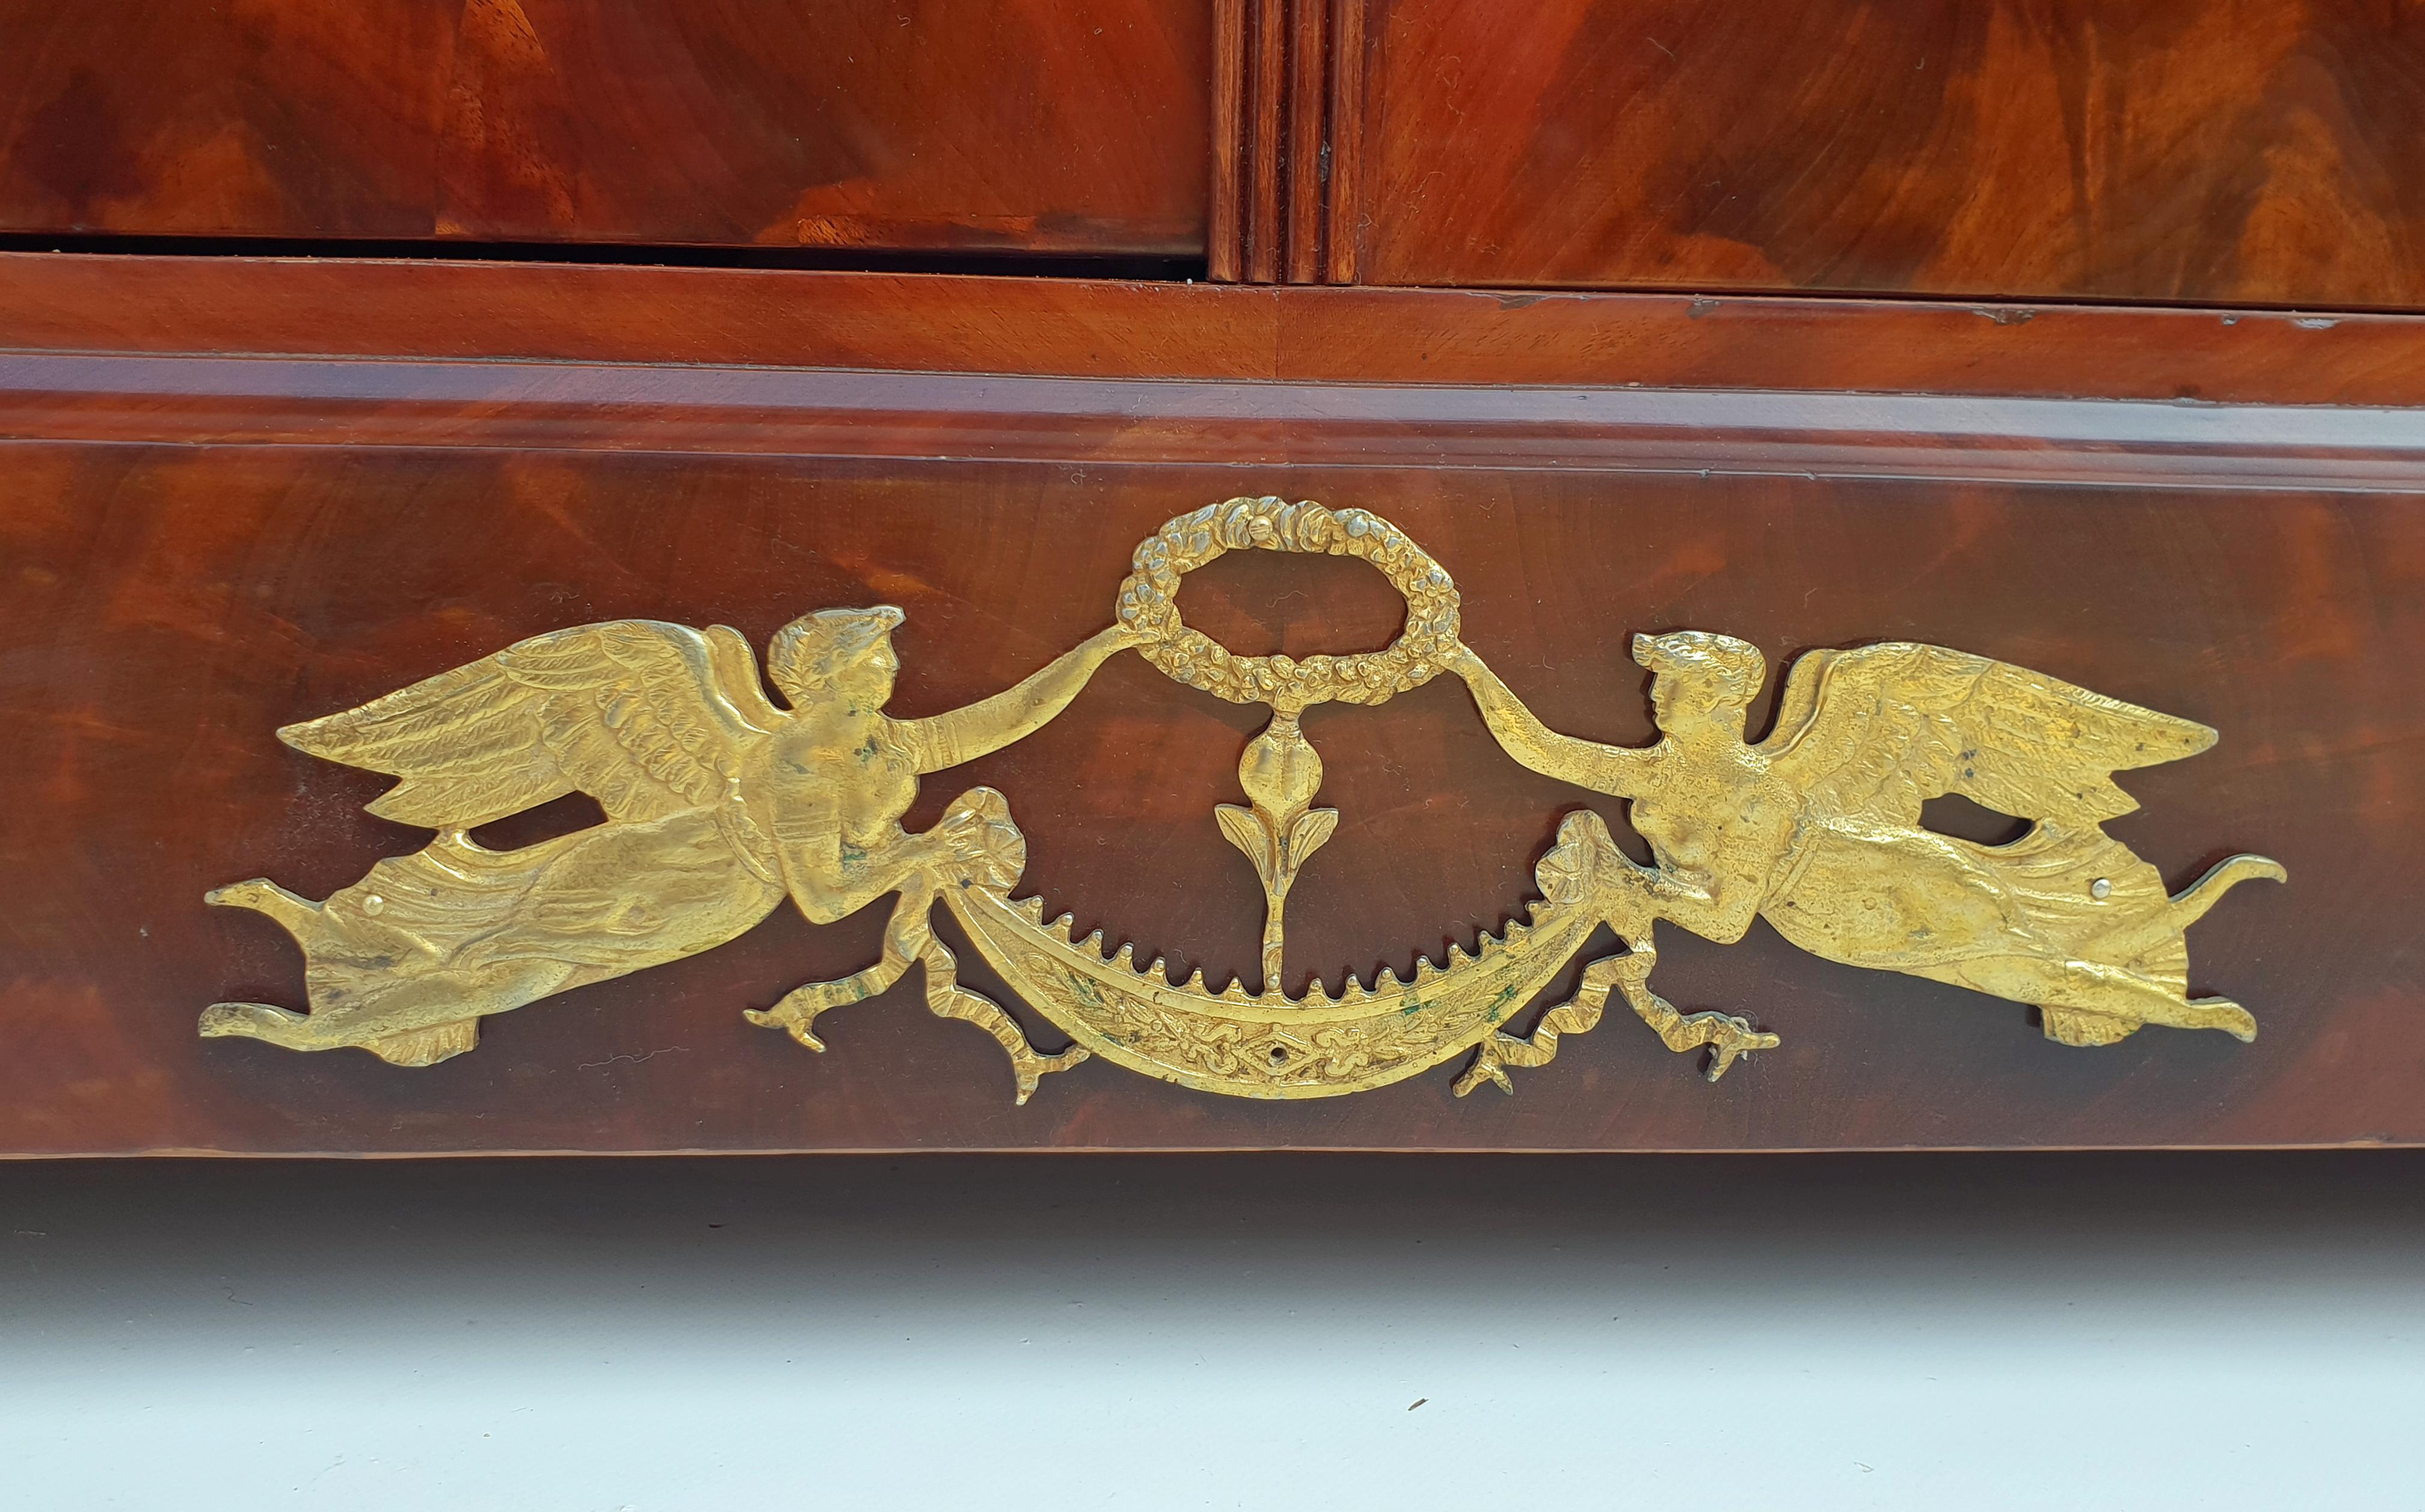 Empire sideboard, Paris, 1800s. Made of mahogany.

Wide pedestal with small bases and elaborate fire-gilt bronze with two angels holding a laurel wreath. Narrow pilaster strips, two doors in fine pyramid mahogany, original key plates and lock and